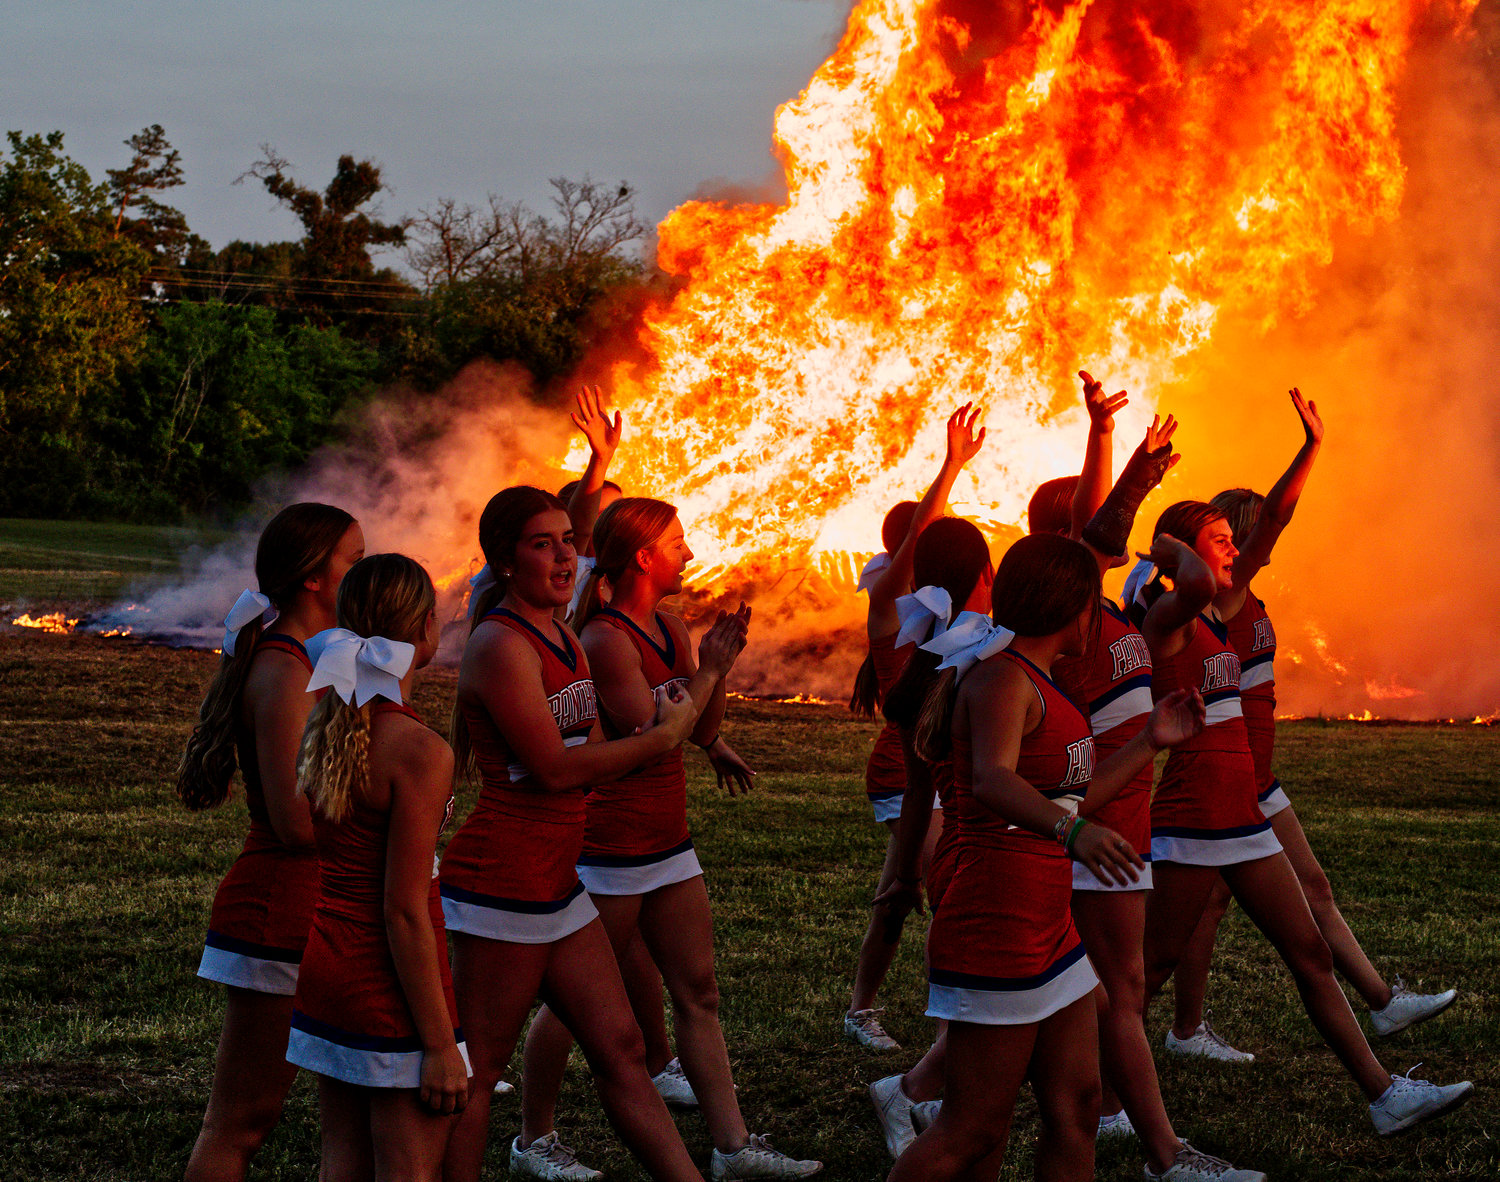 Alba-Golden High School cheerleaders pep up the crowd at the homecoming bonfire held last Wednesday night near the school. [find more photos of festivities and fire]